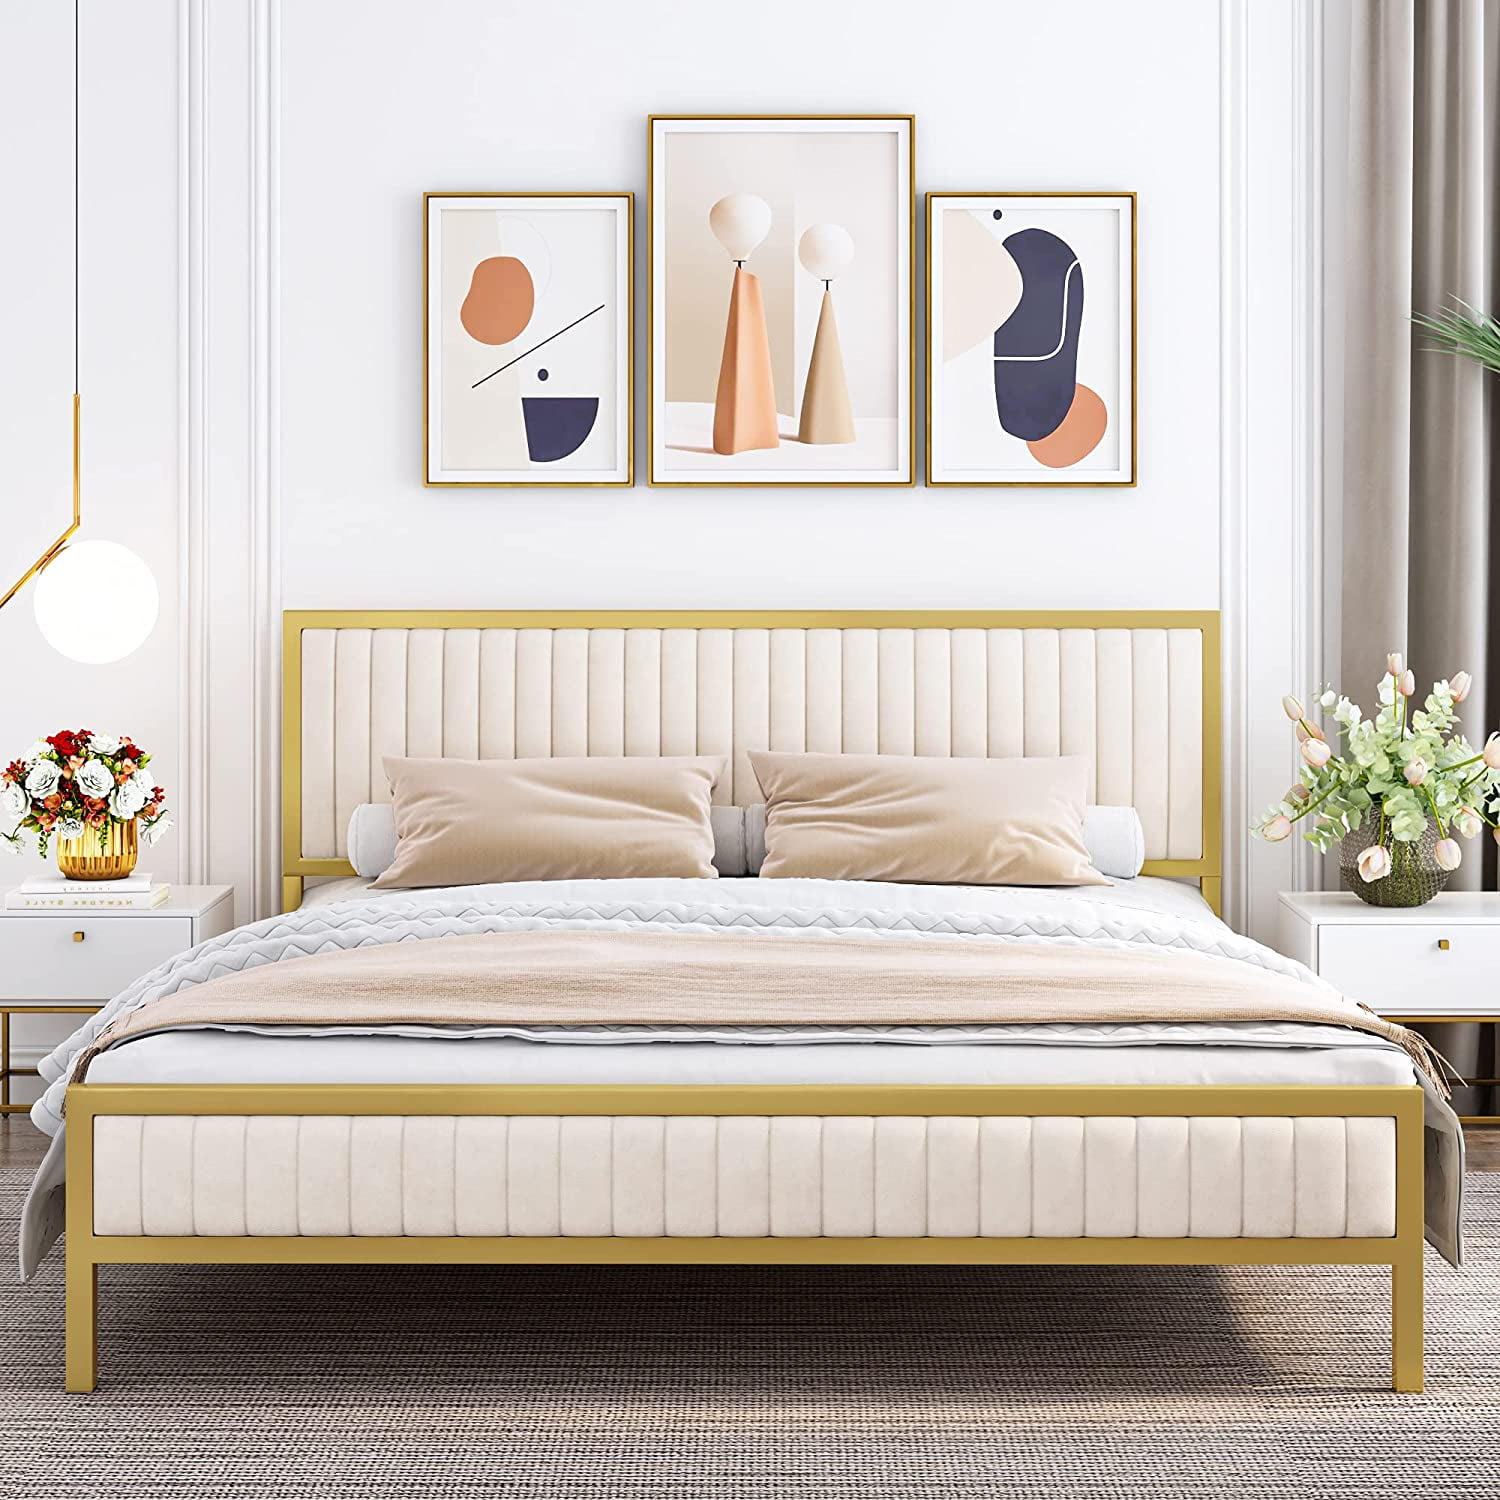 Homfa King Bed Frame With Headboard And, Diy Rustic Queen Bed Frame With Storage Boxes White Luröy